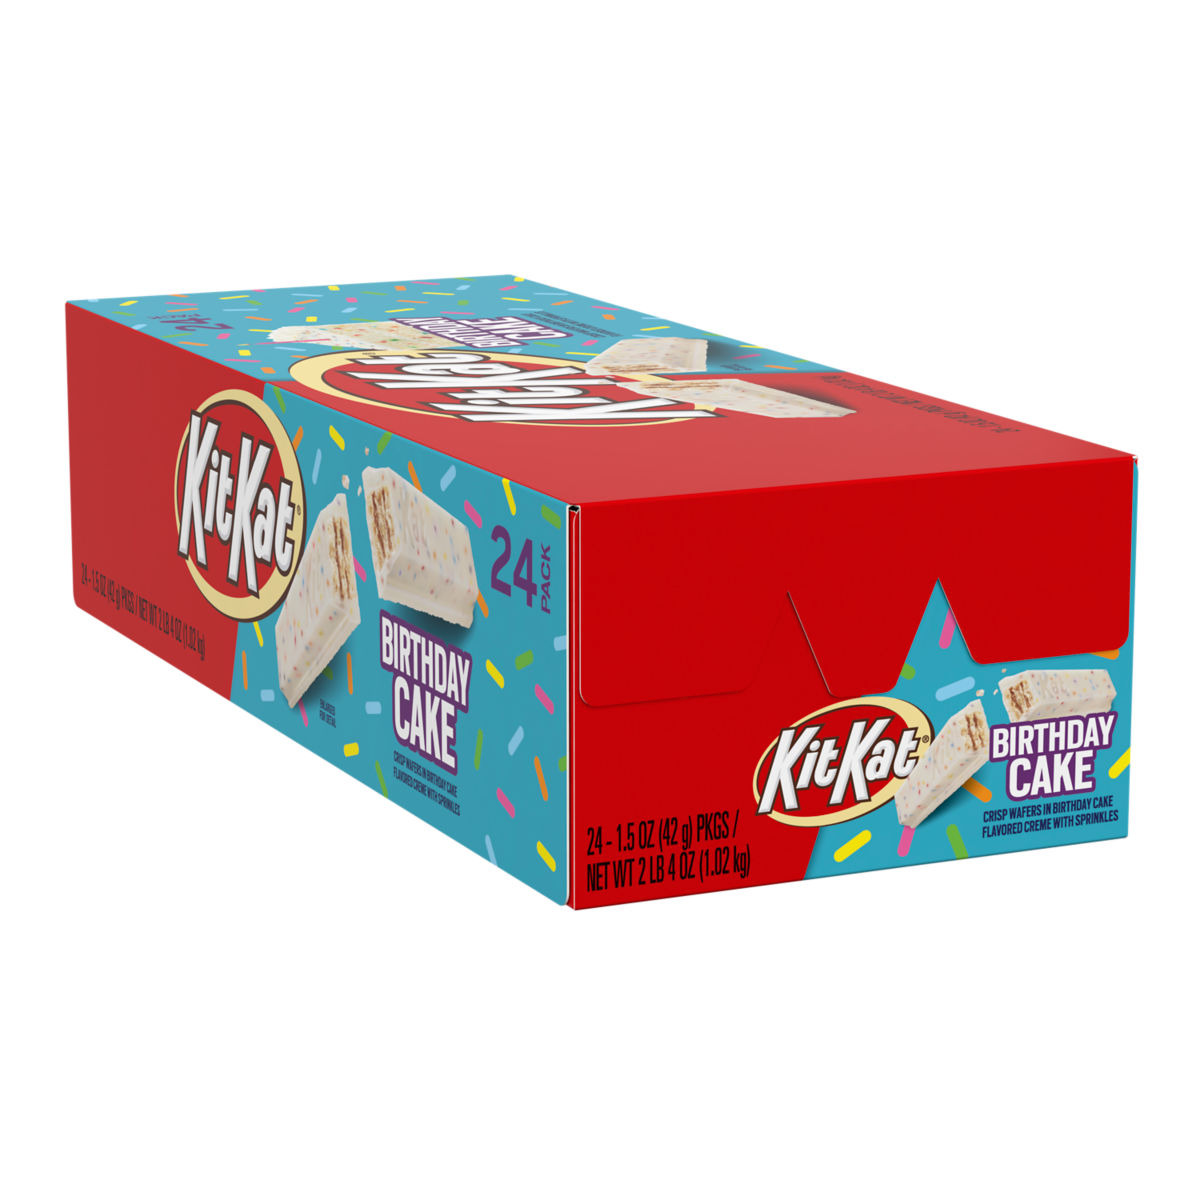 Kit Kat, Limited Edition Crisp Wafers in Birthday Cake Flavored White Crème  with Sprinkles Candy Bar Box, 1.5 Oz, 24 ct. 